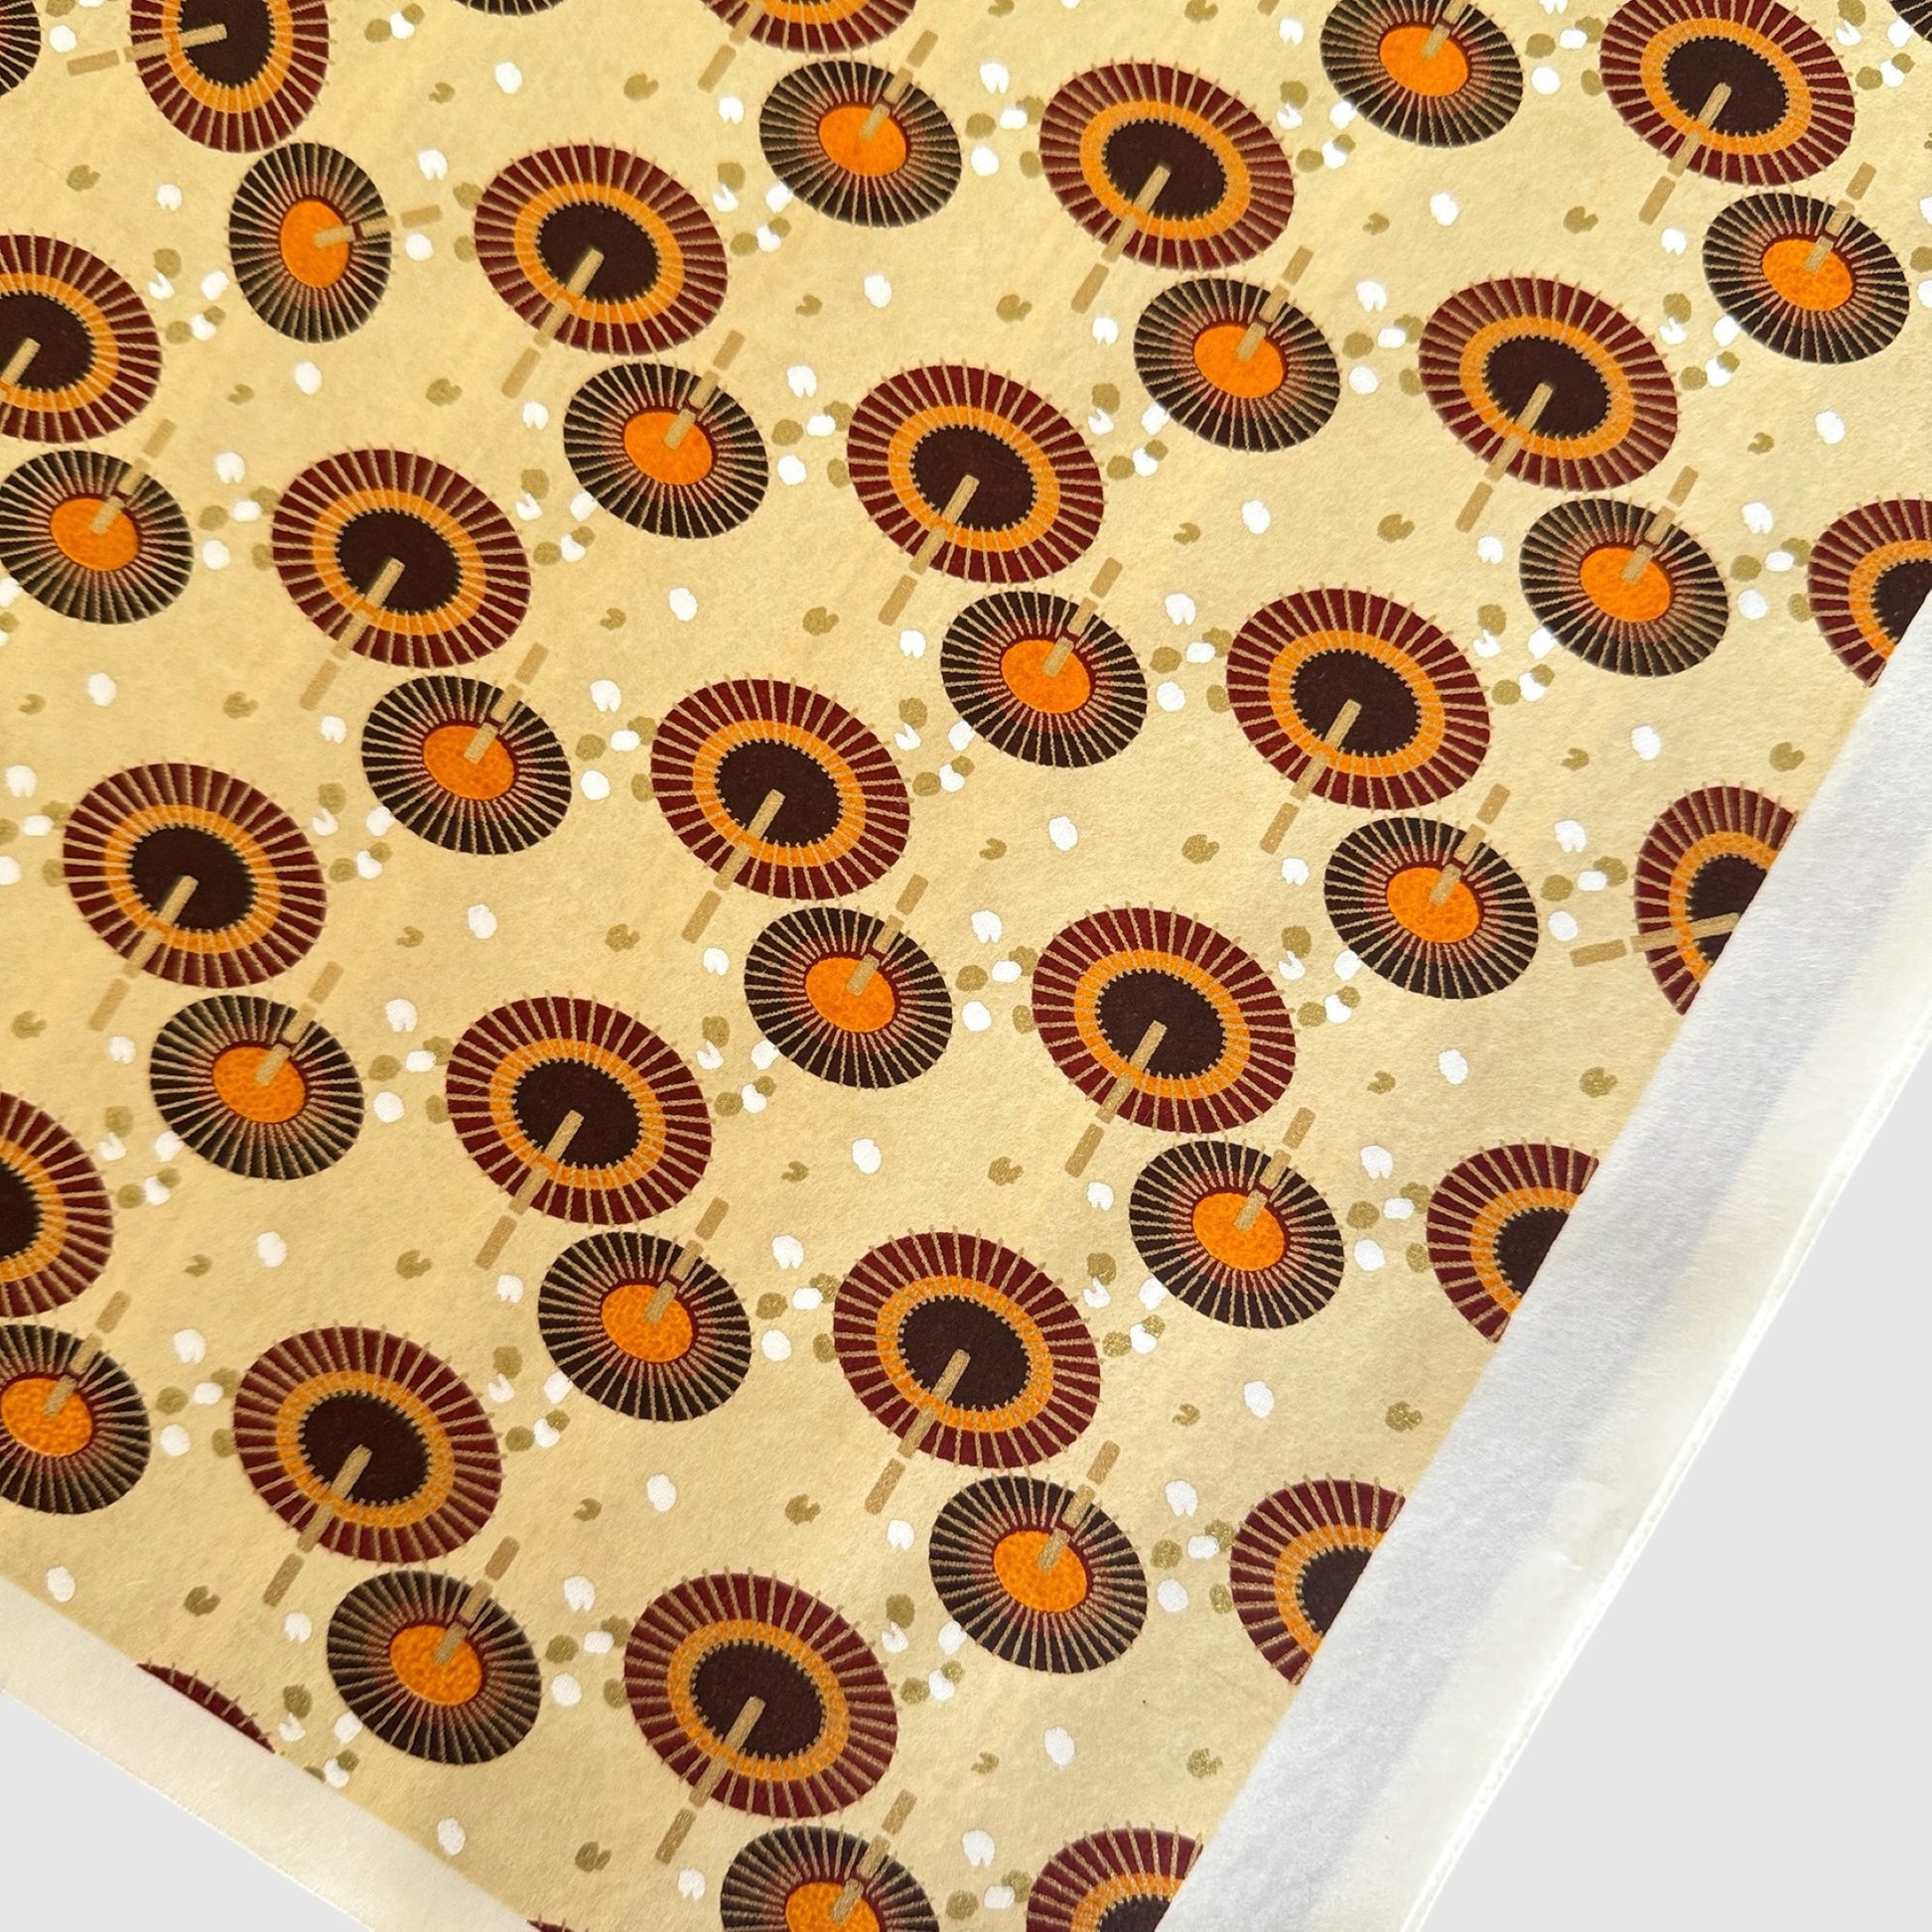 Japanese silkscreen chiyogami paper with a brown and orange umbrella pattern on a buttermilk backdrop